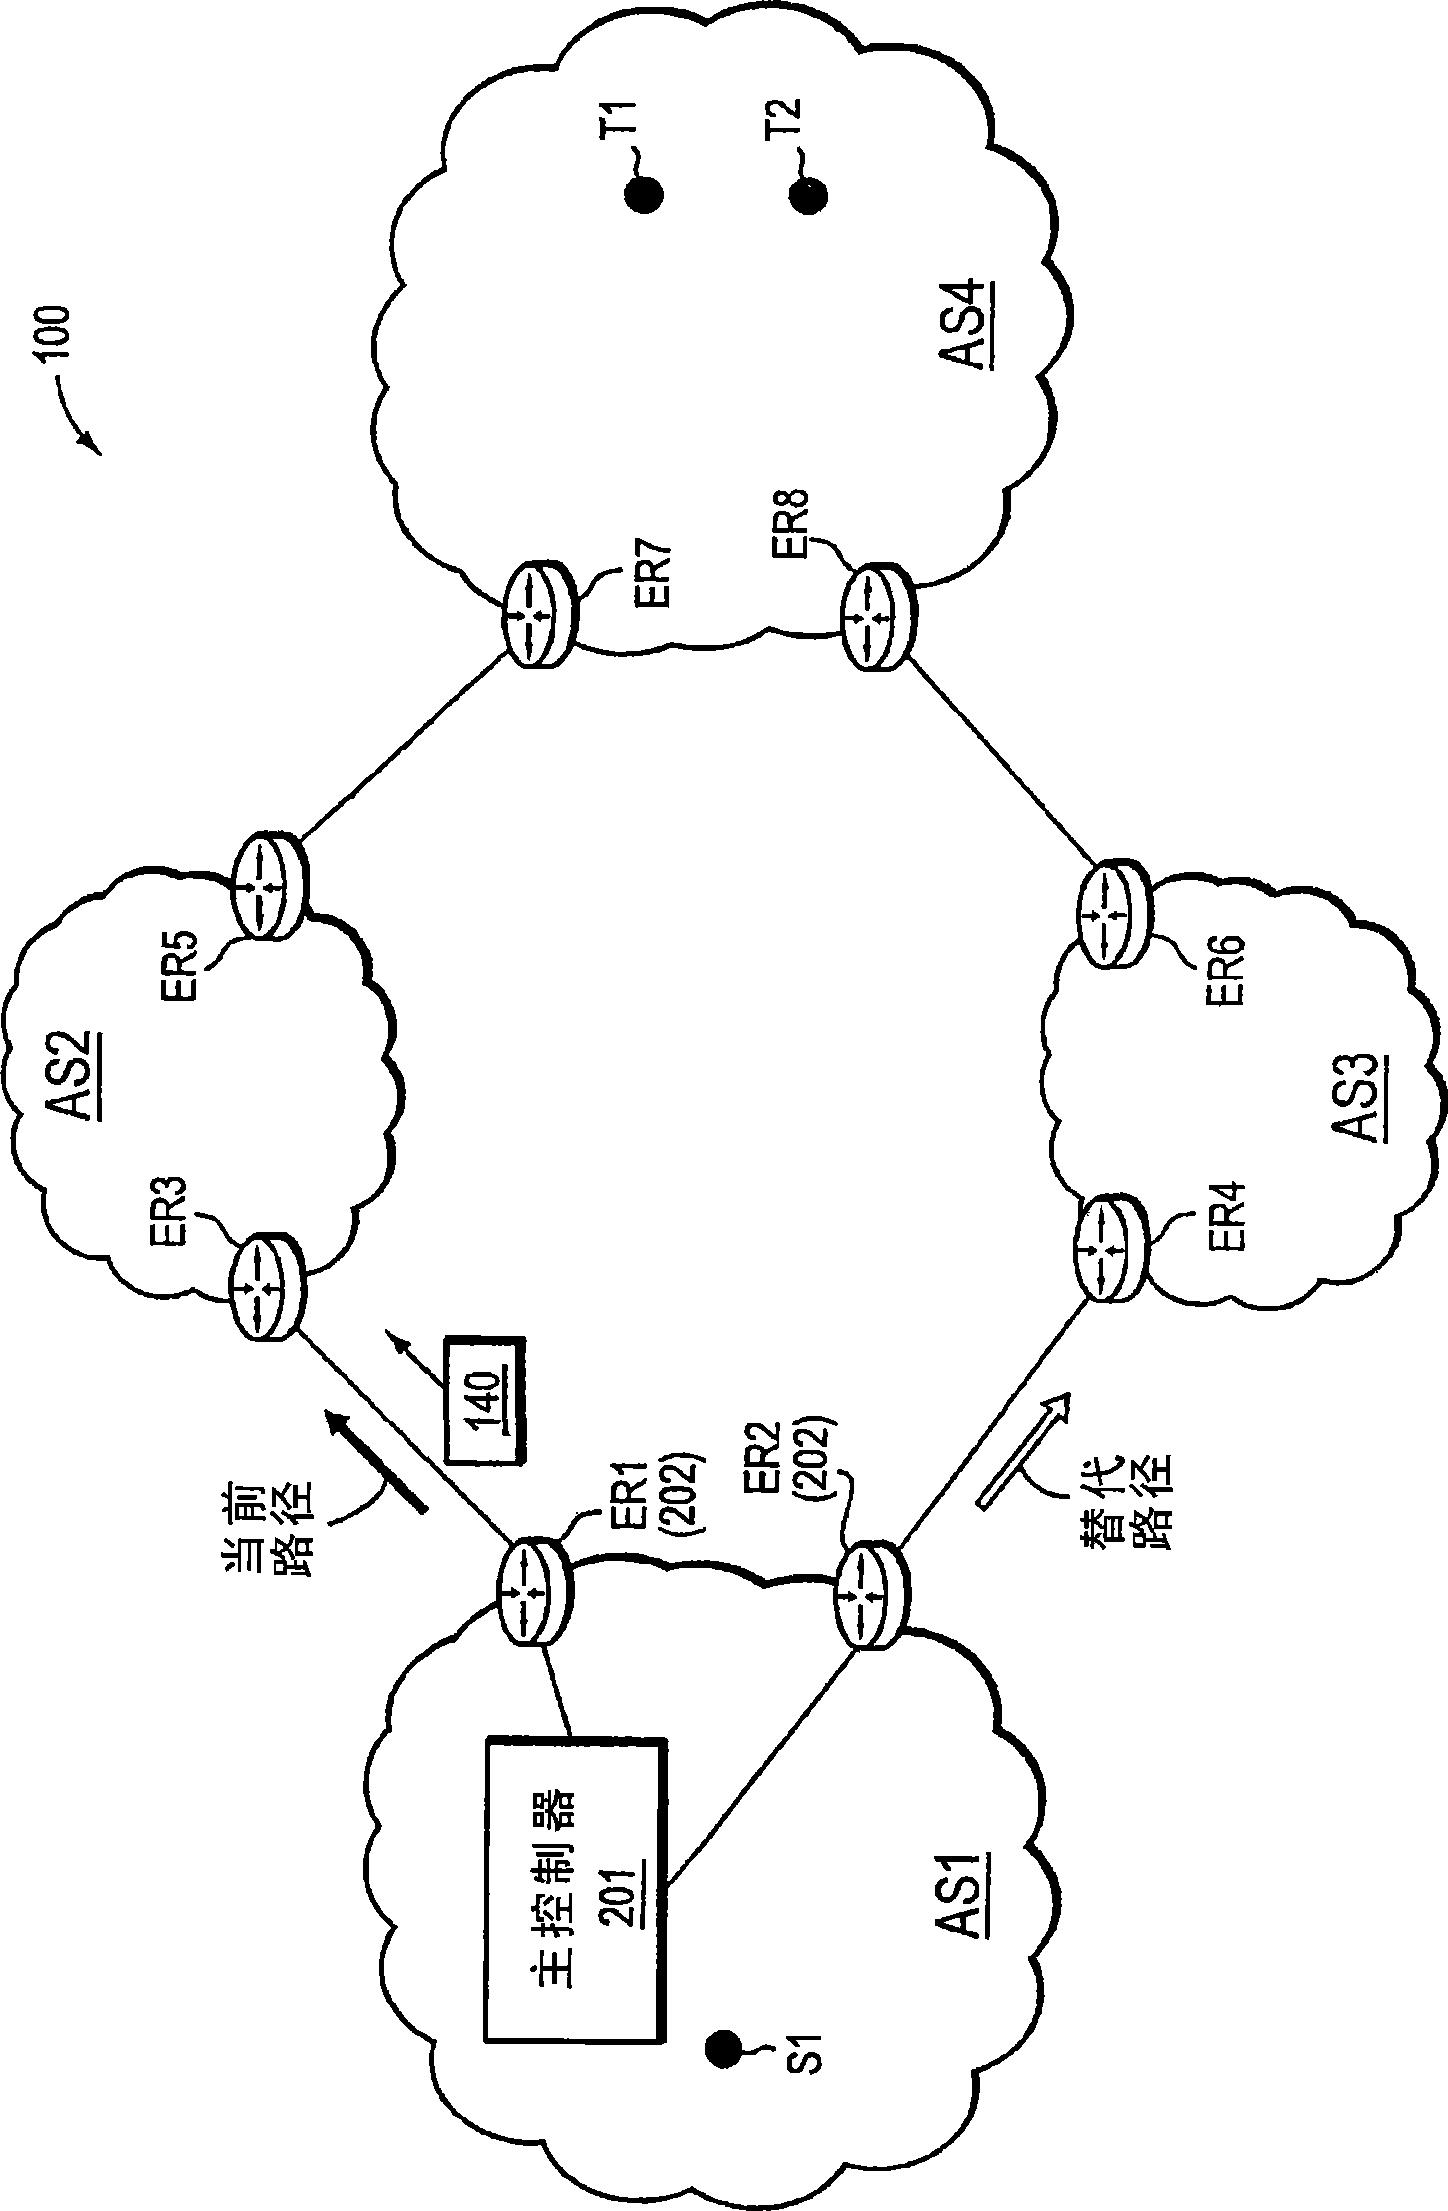 Event triggered traceroute for optimized routing in a computer network